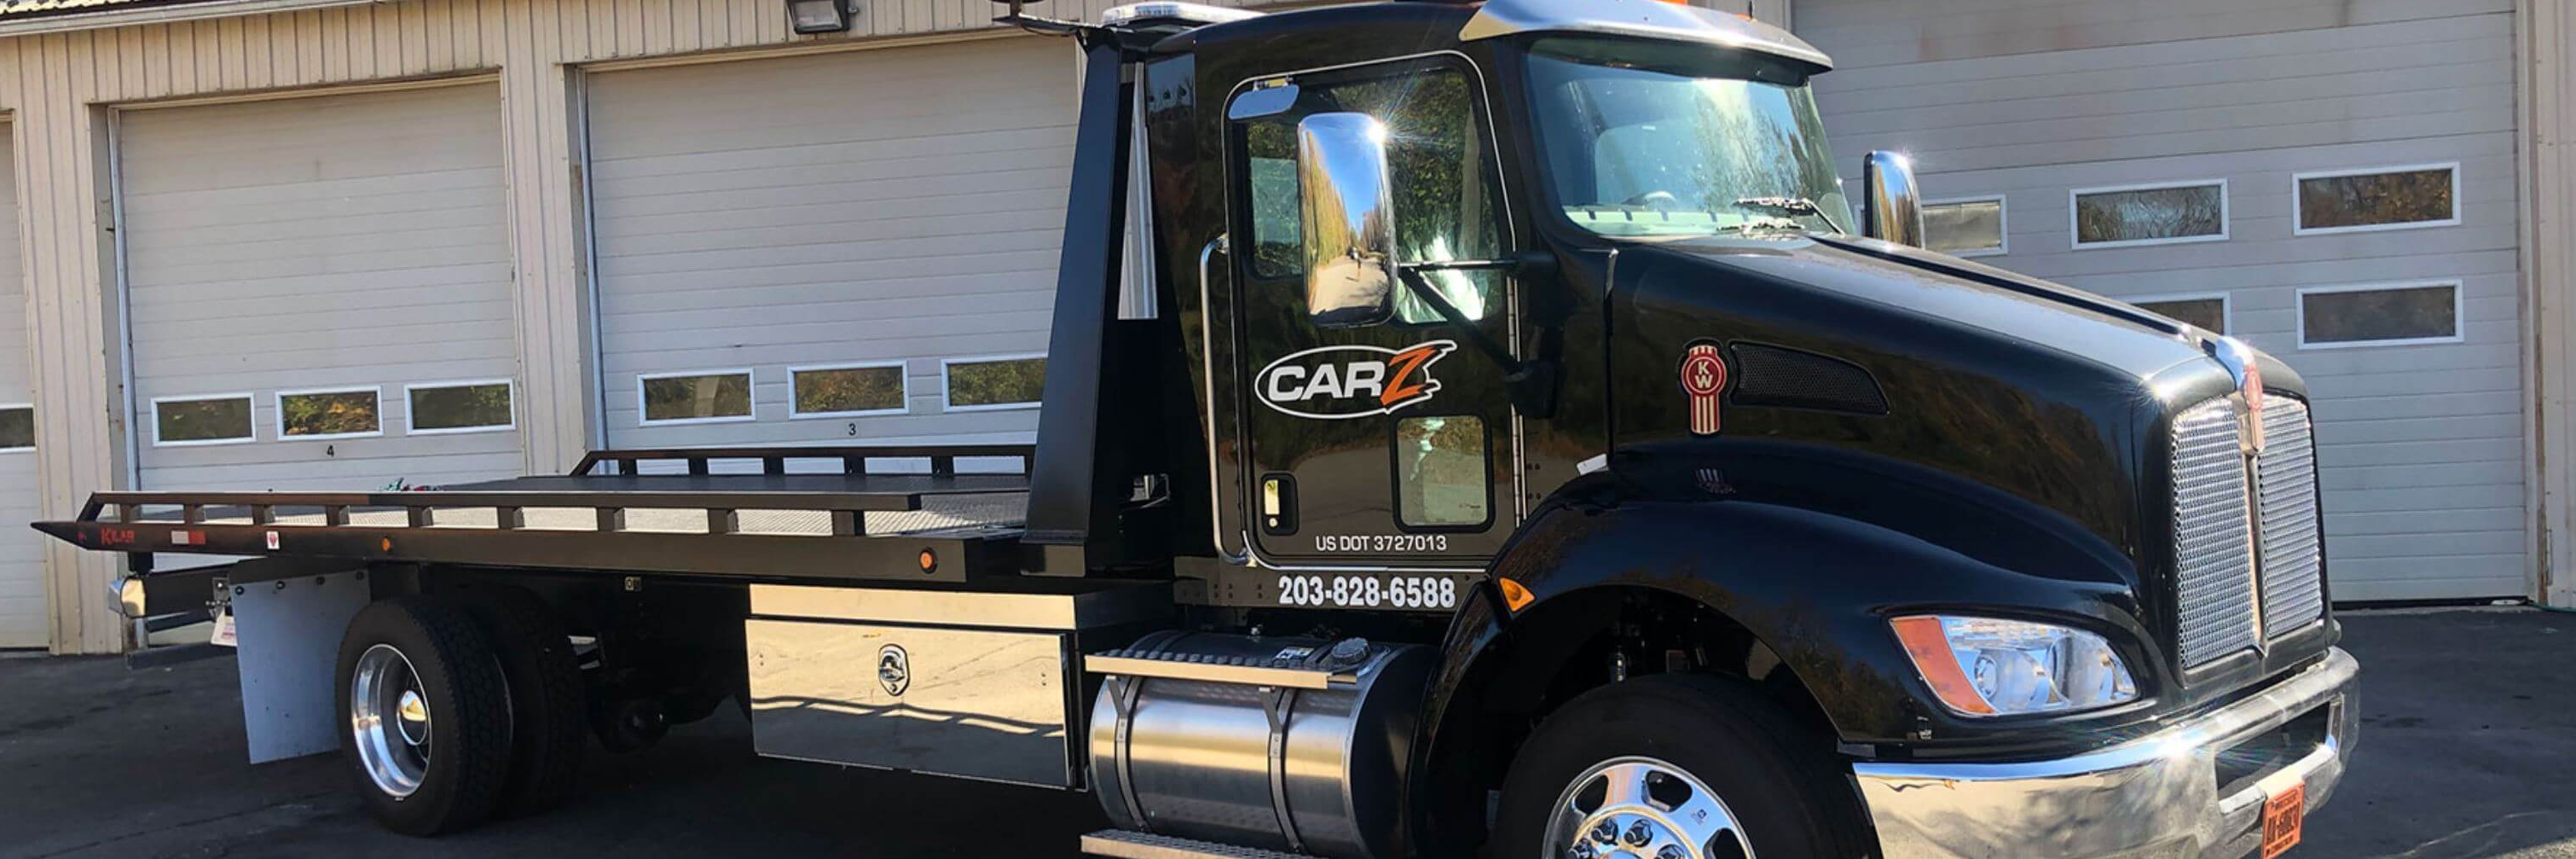 Carz Towing Towing.com Profile Banner